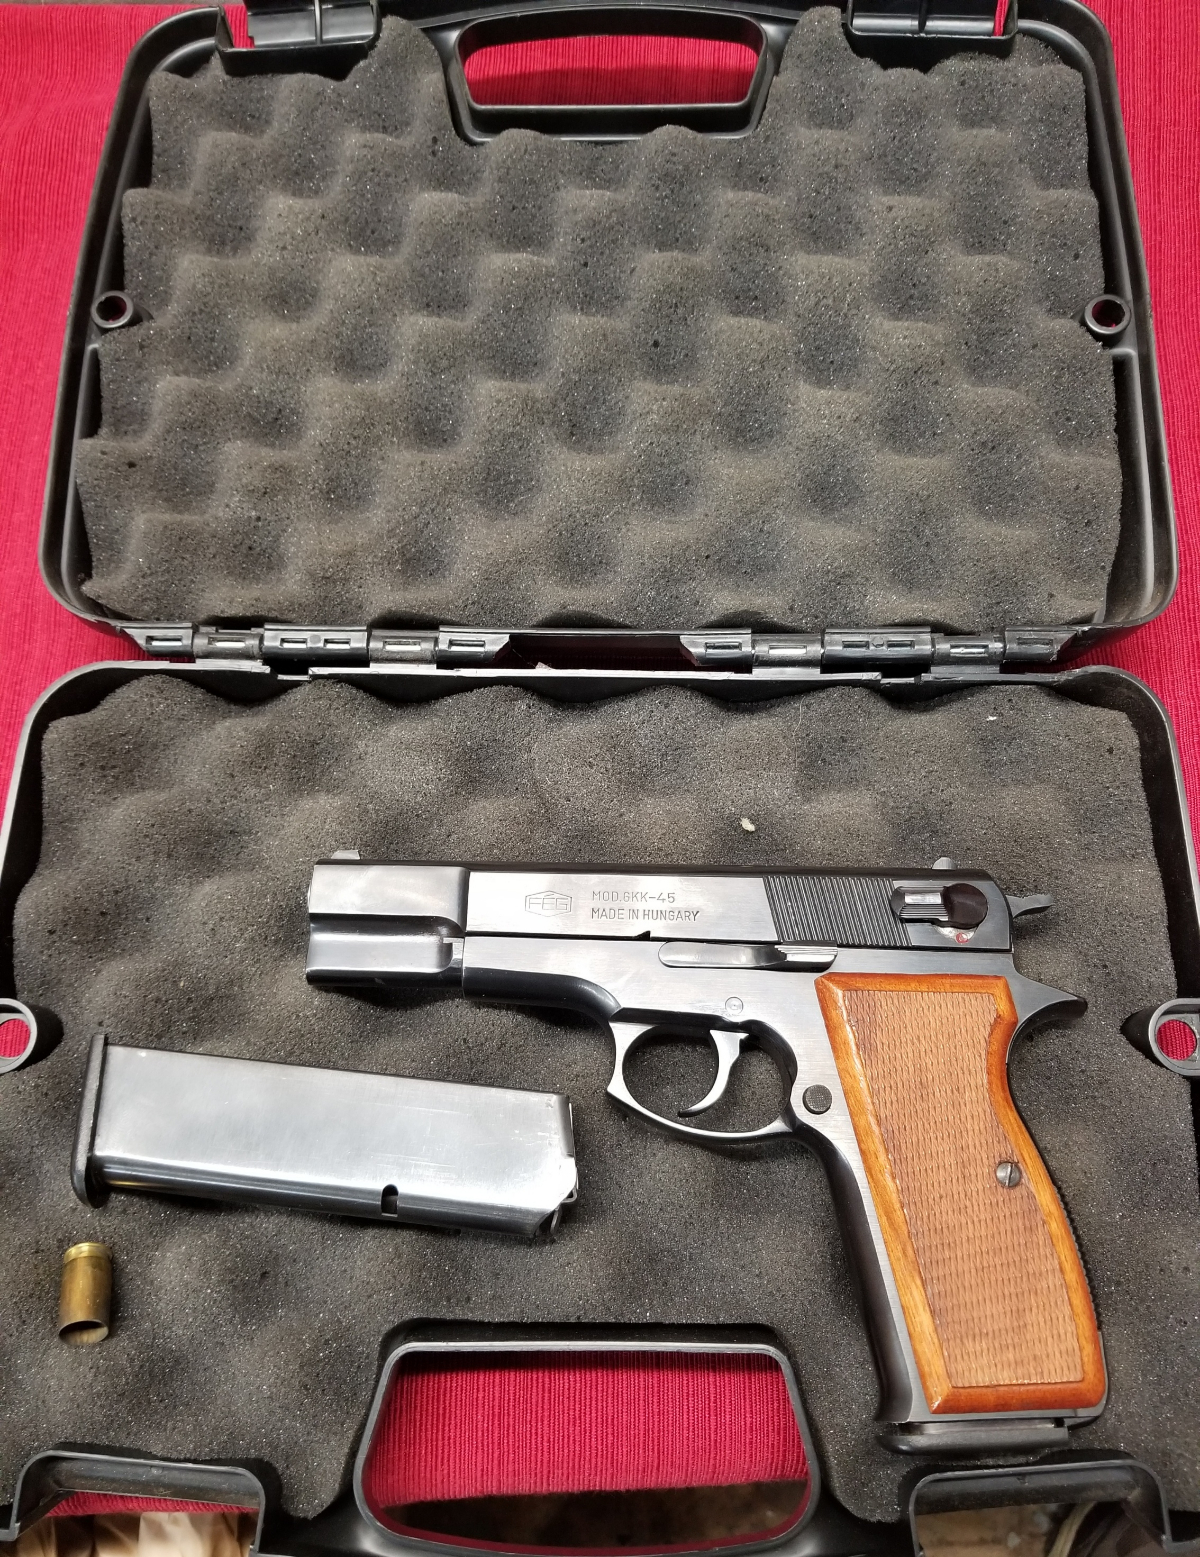 Feg Model Gkk-45 W/2 Magazines And Hard Case .45 Acp For Sale at ...